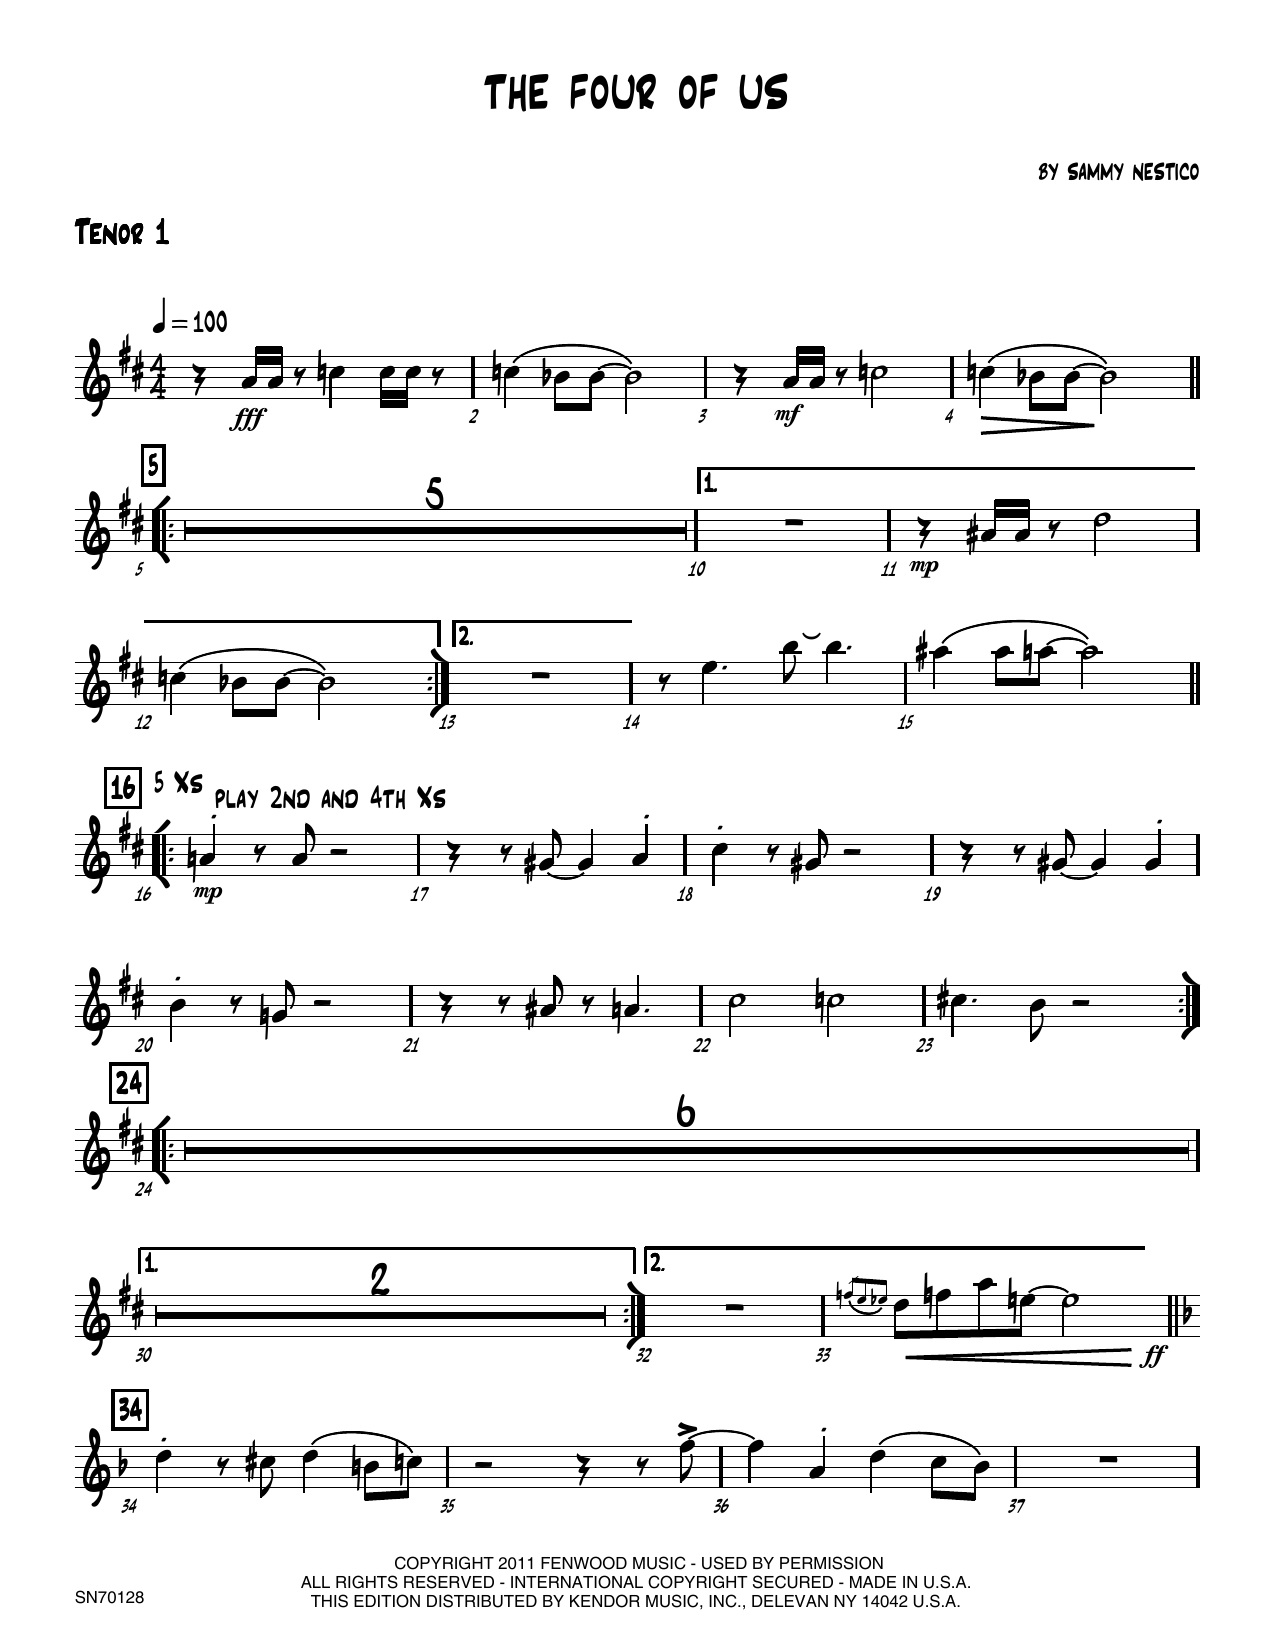 Download Sammy Nestico The Four Of Us - 1st Tenor Saxophone Sheet Music